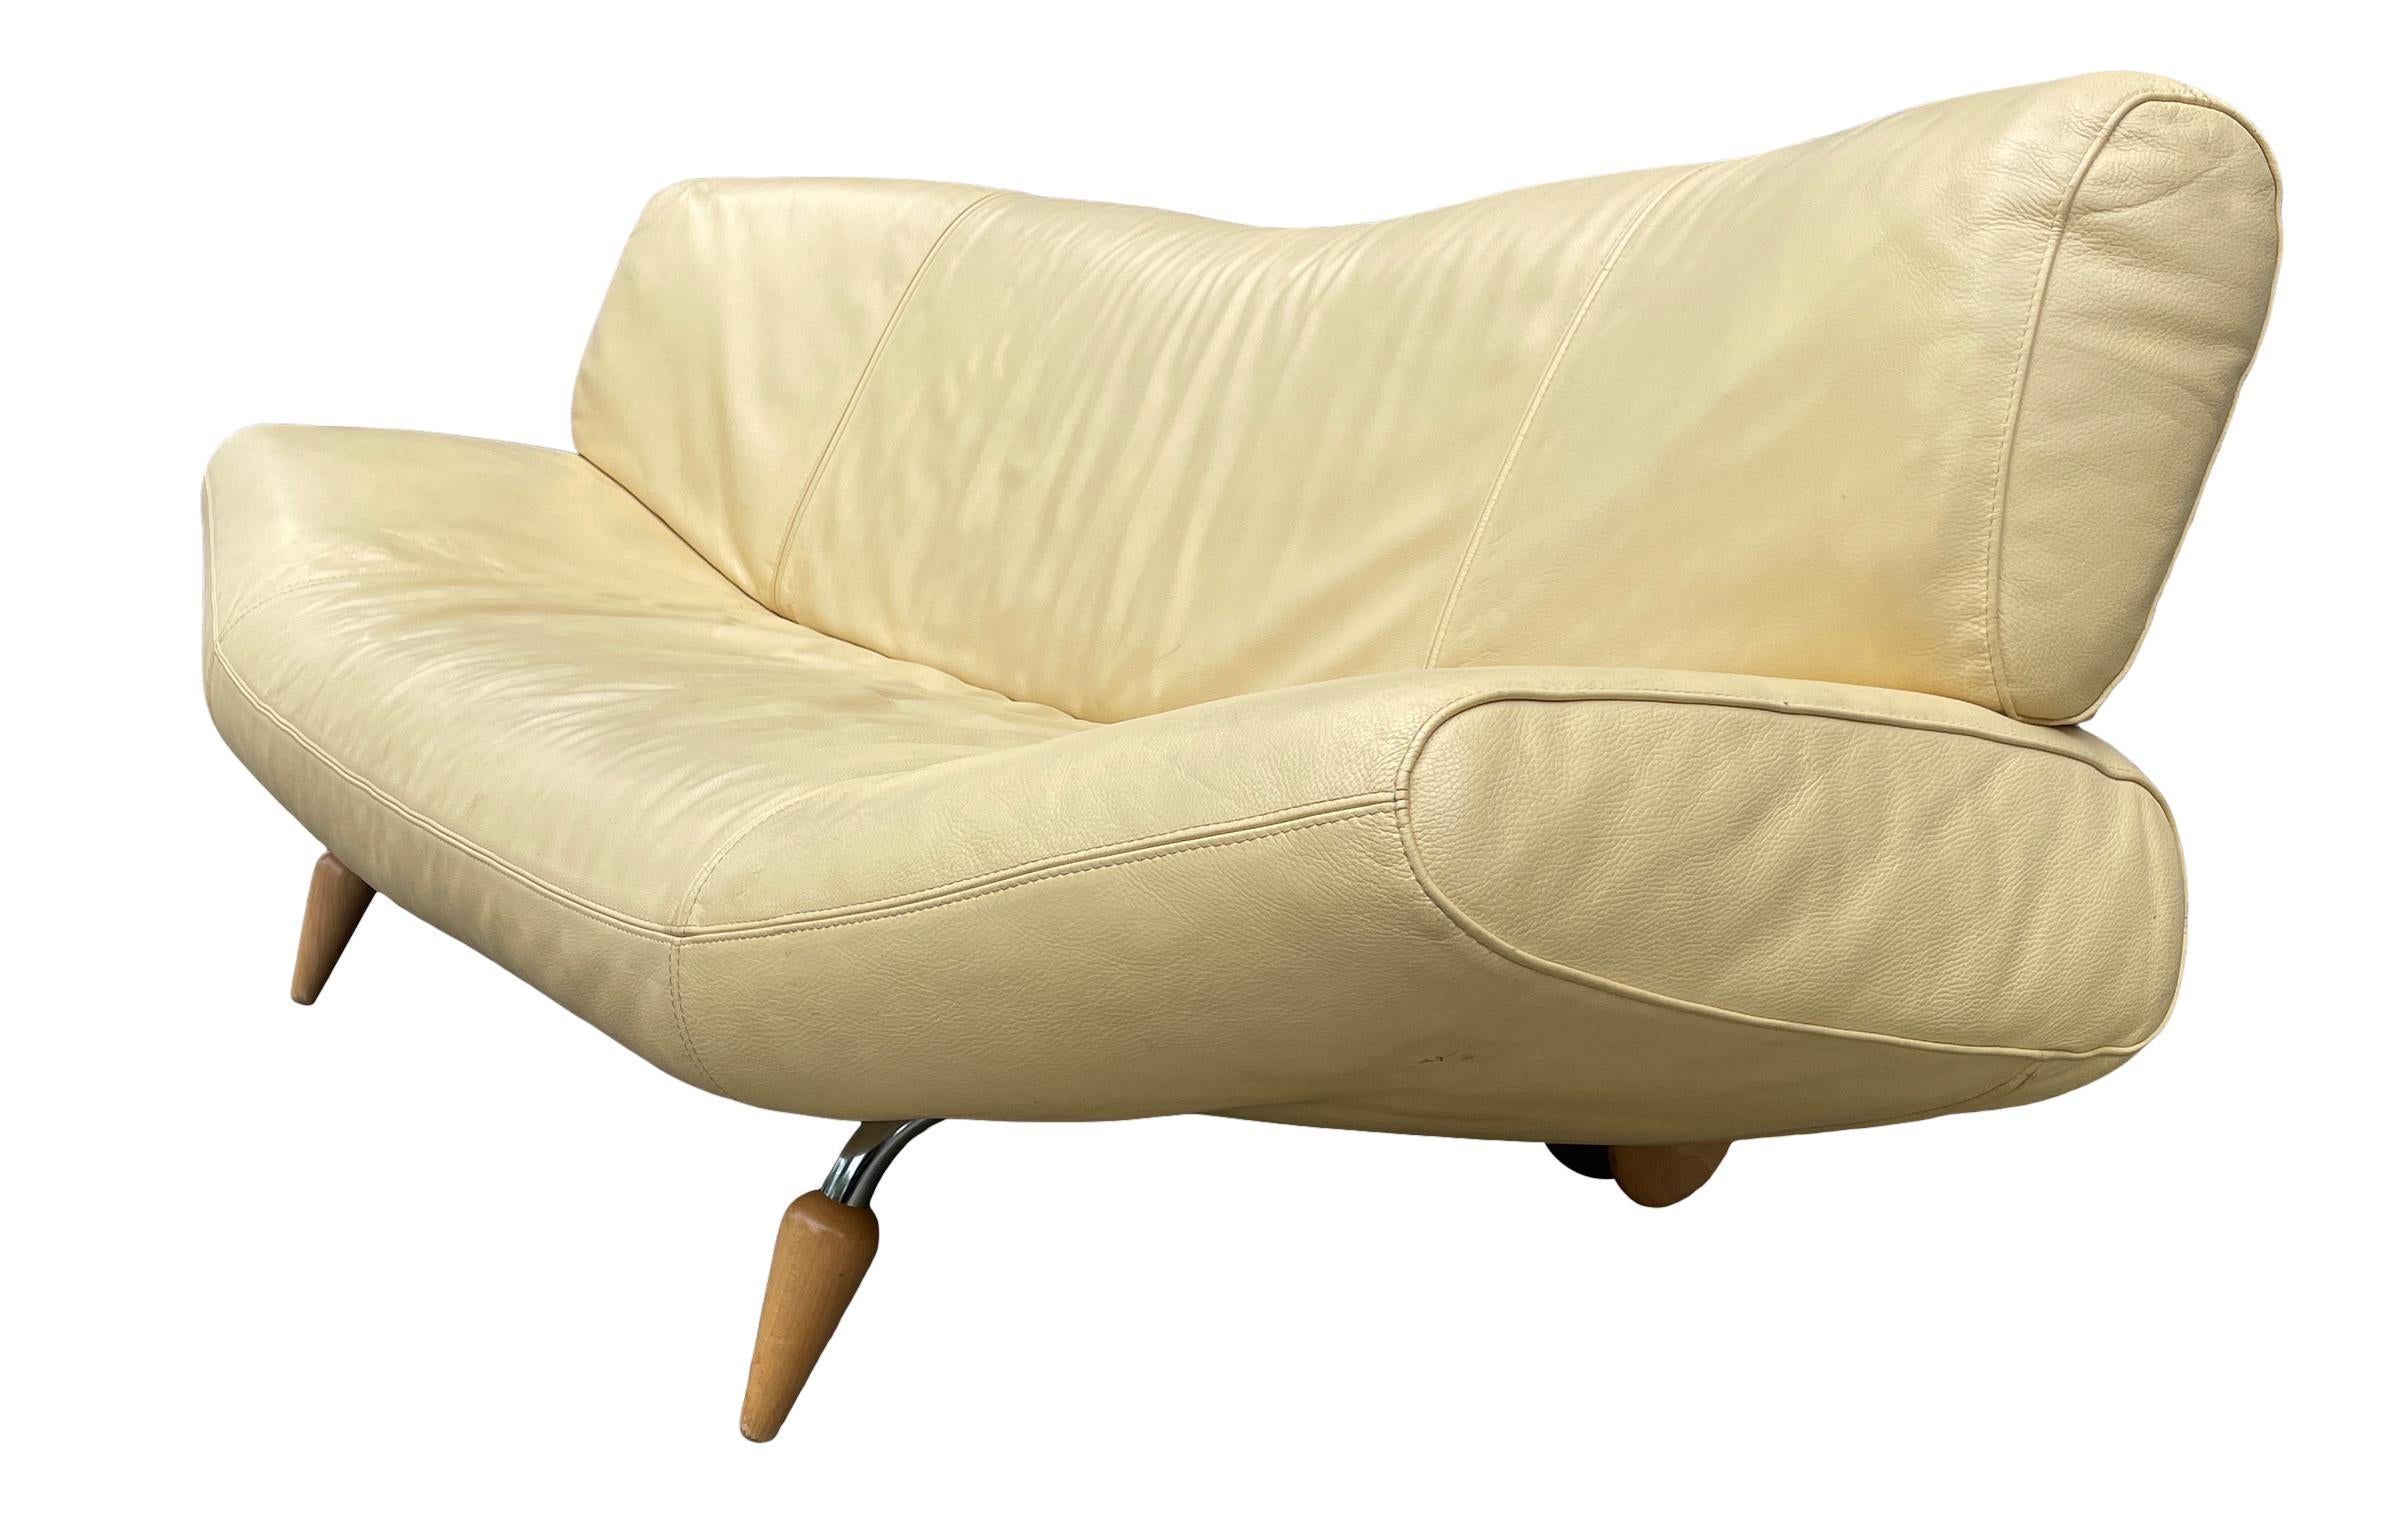 Italian Vintage Molinari Curved Light Yellow Leather Sofa Curved Back, Italy